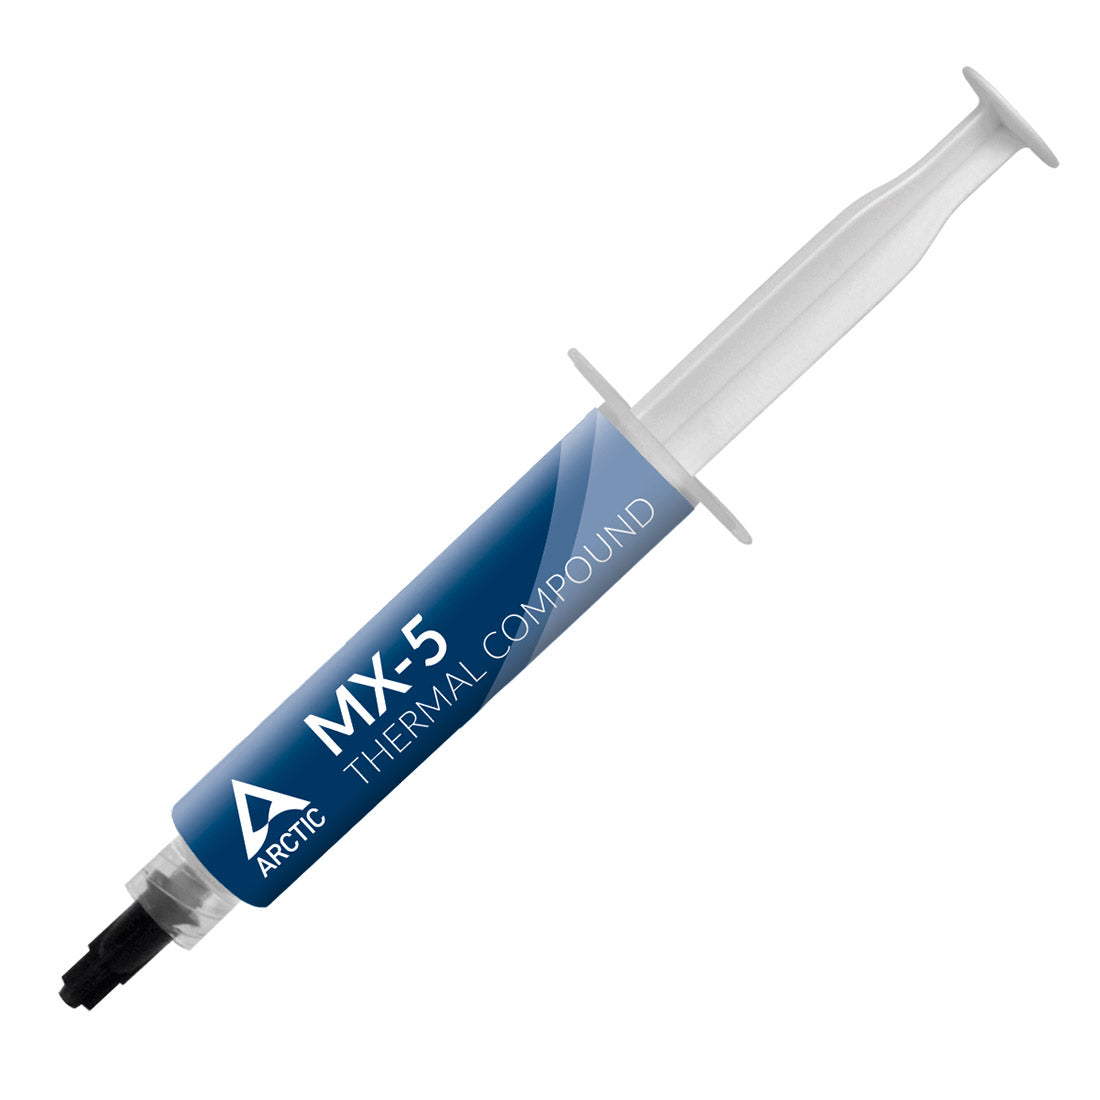 ARCTIC MX-5 20gm Carbon Based Thermal Paste